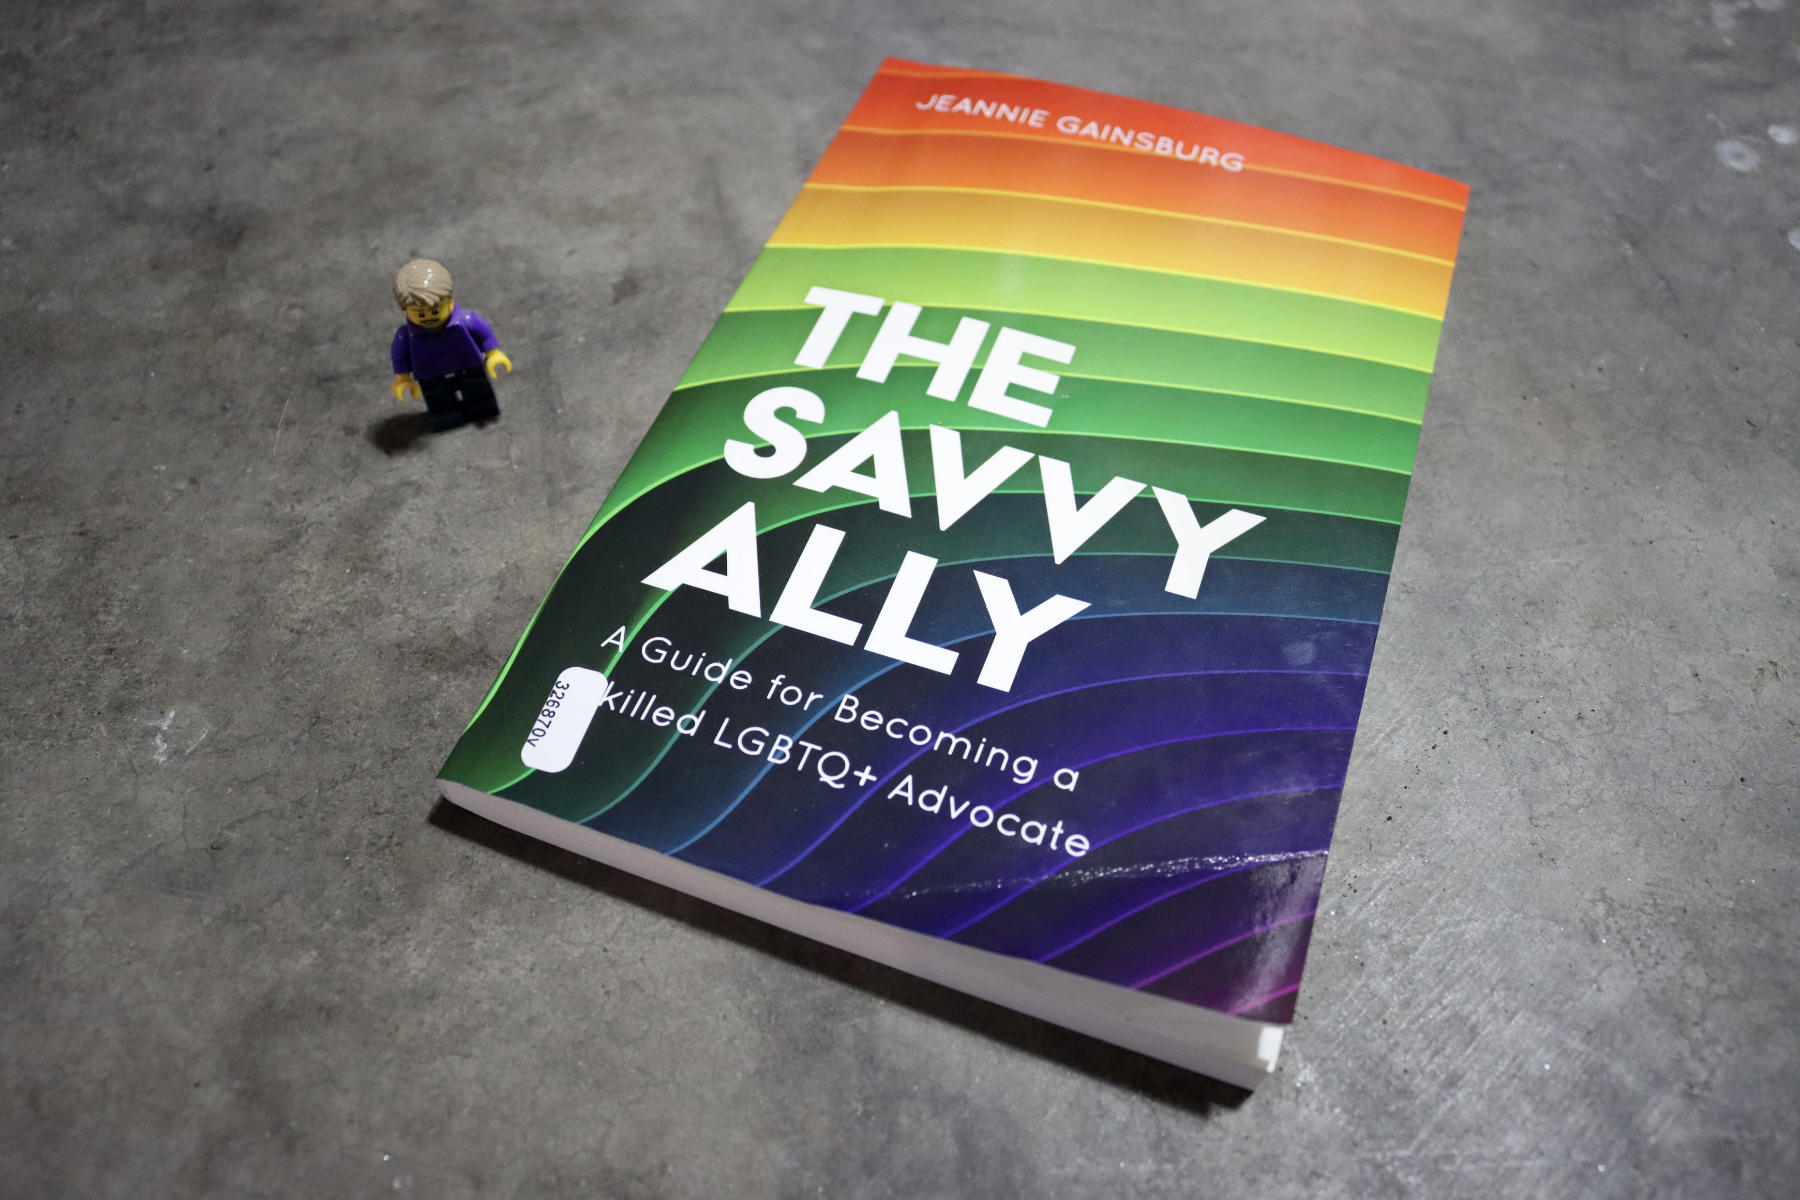 The Savvy Ally by Jeannie Gainsburg